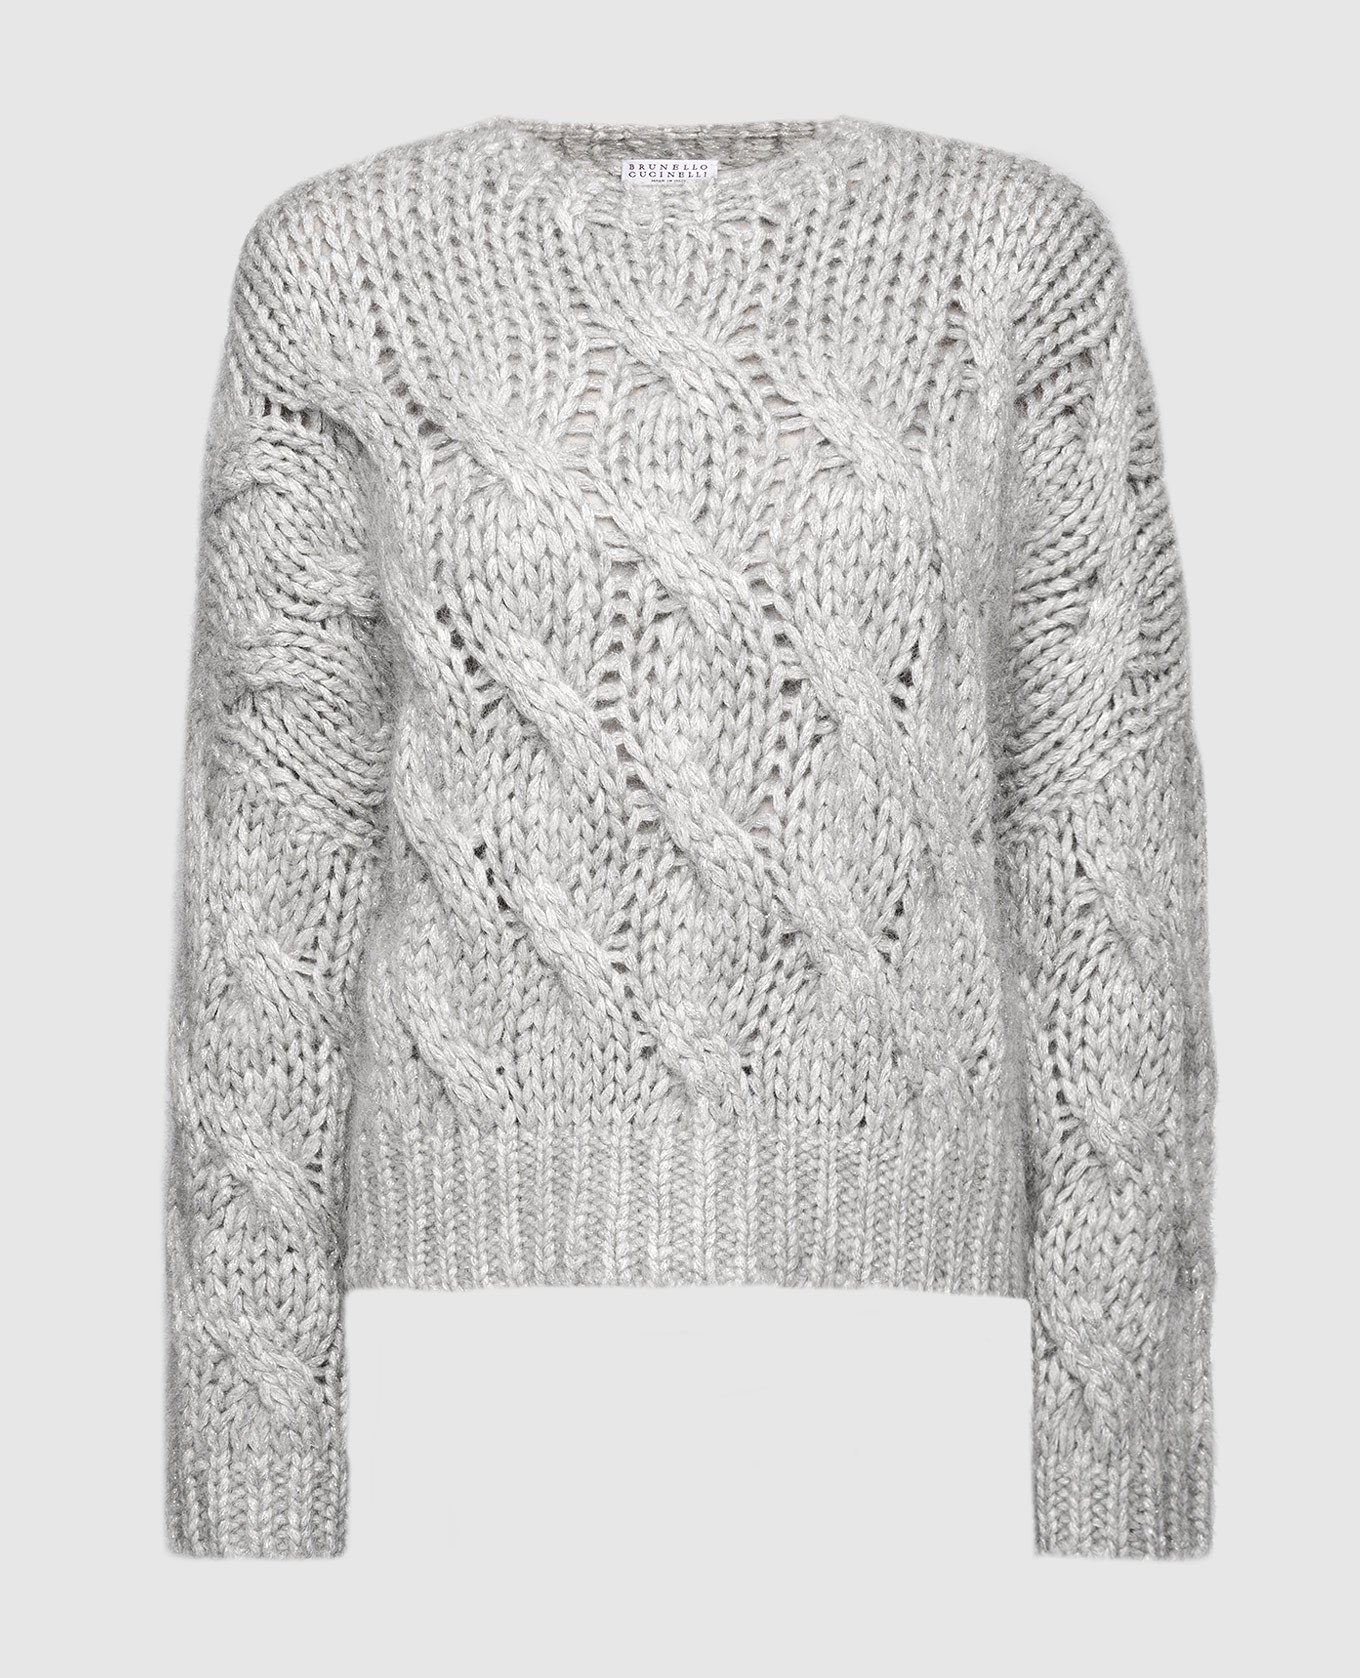 Gray sweater in a textured pattern with lurex